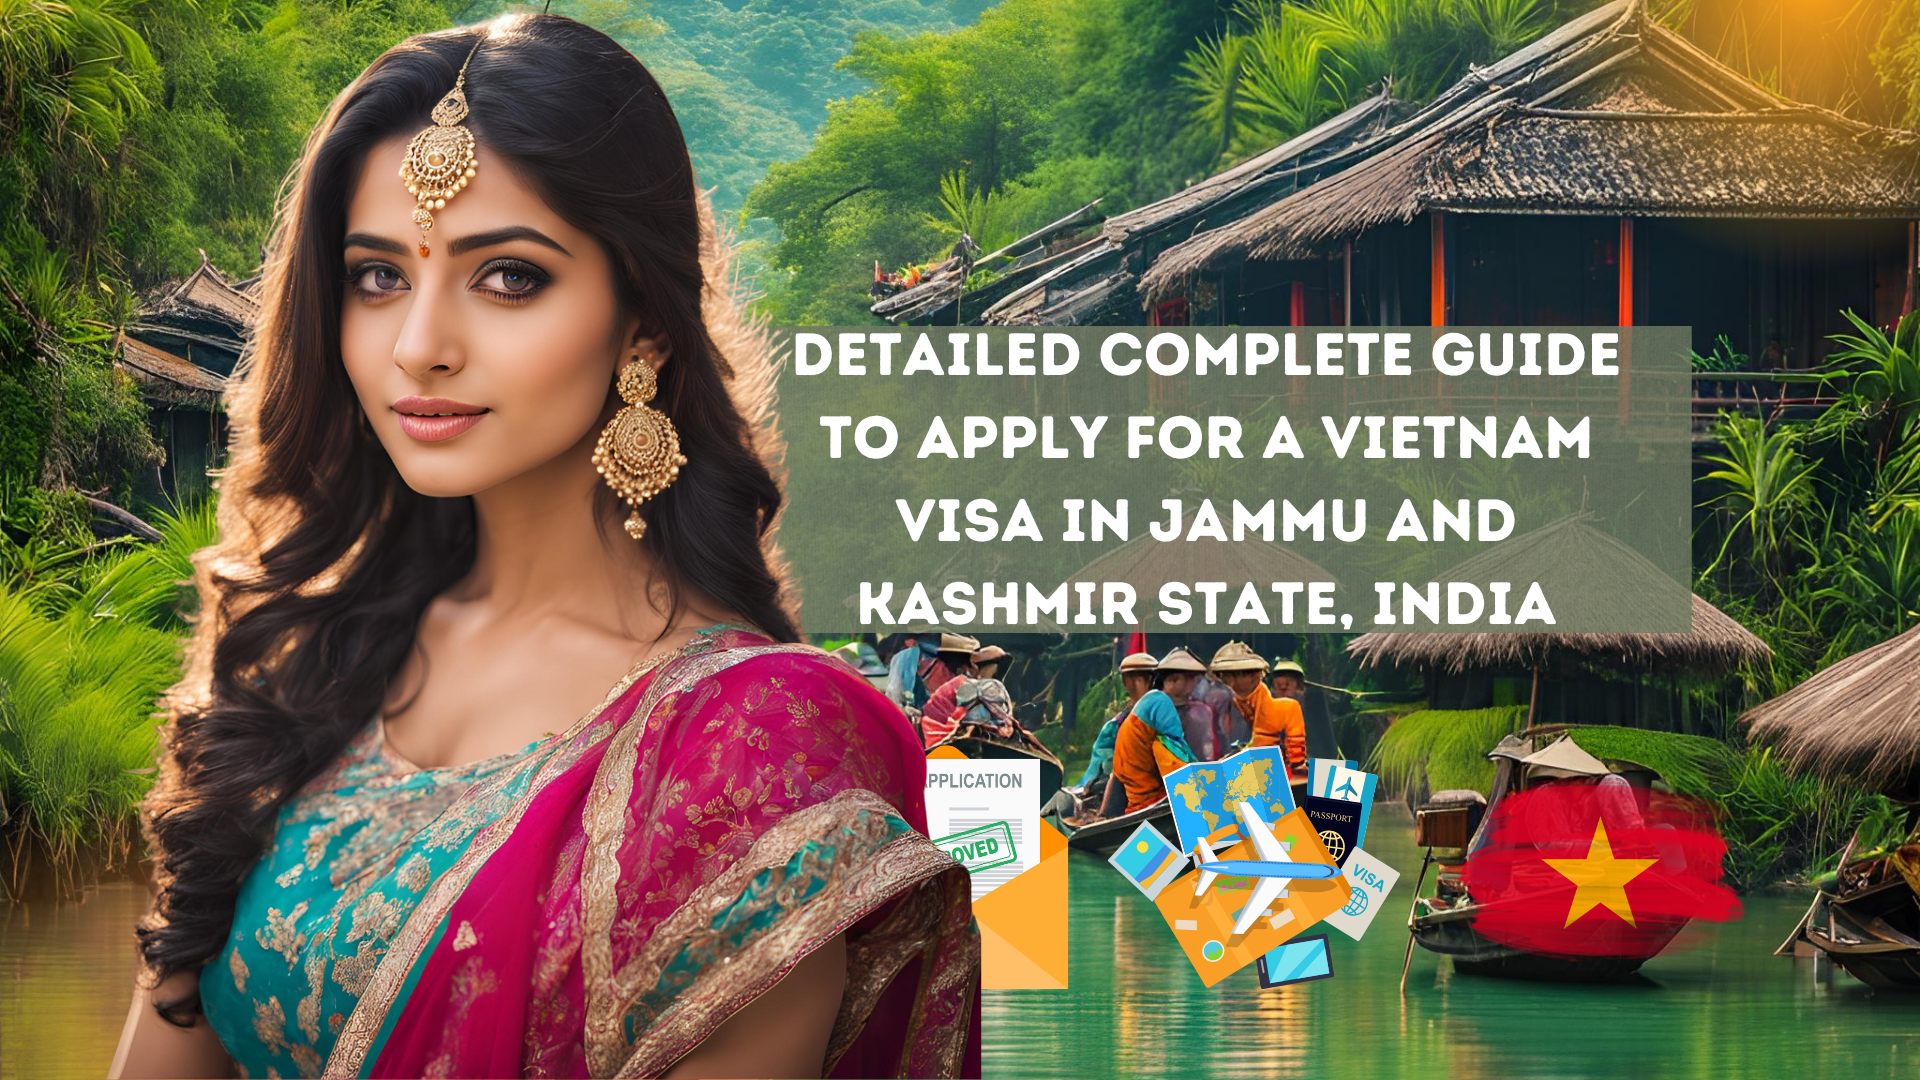 Detailed Complete Guide to Apply for a Vietnam Visa in Jammu and Kashmir State, India